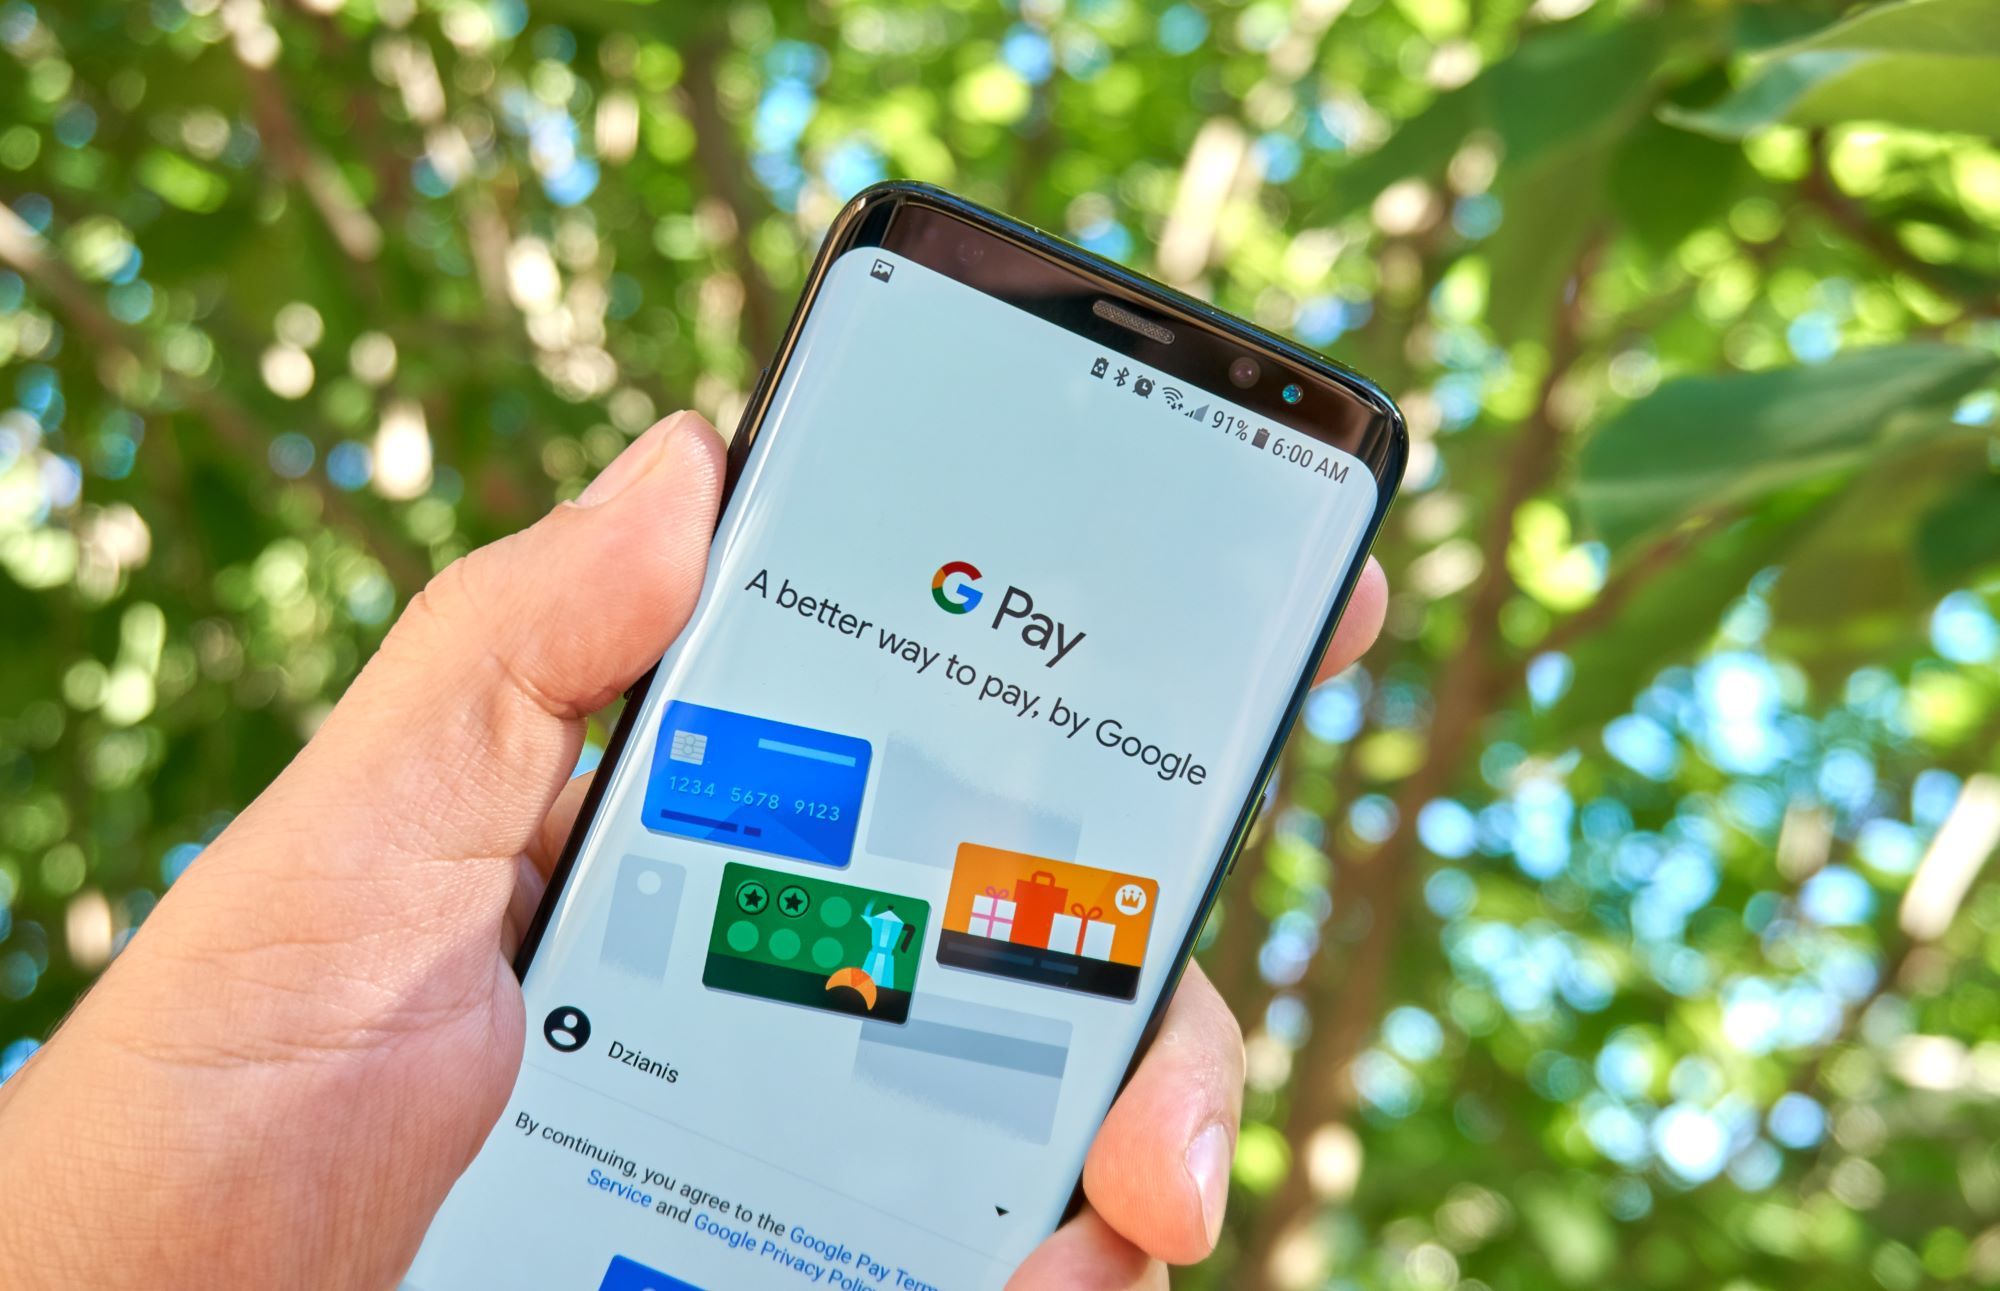 Google Pay not working? Here's a few quick fixes